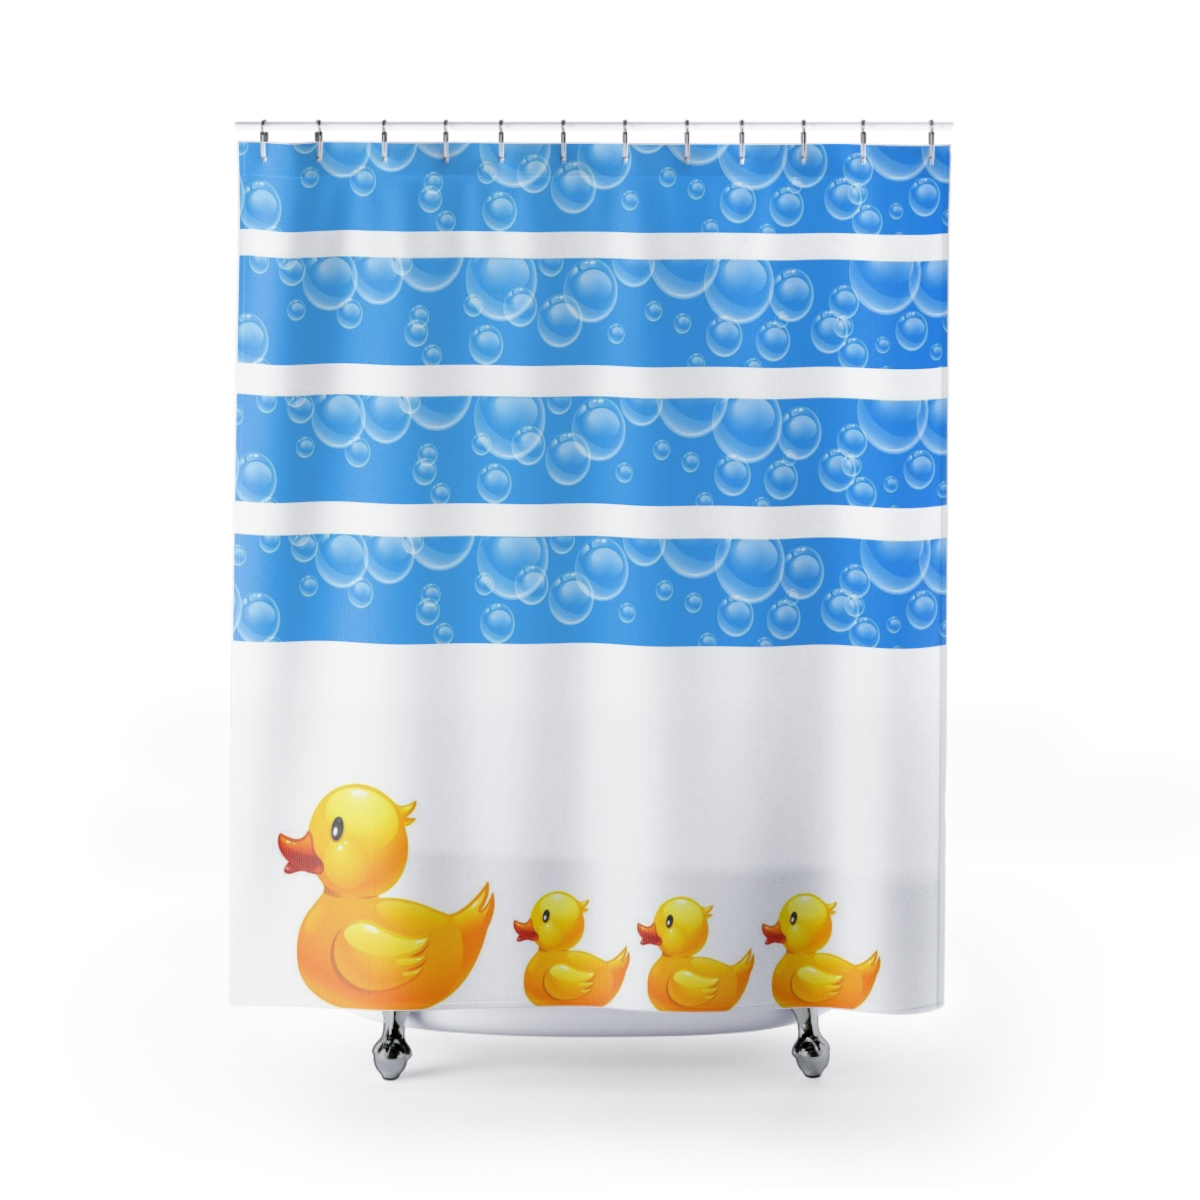 Shower Curtains Rubber Ducks product thumbnail image